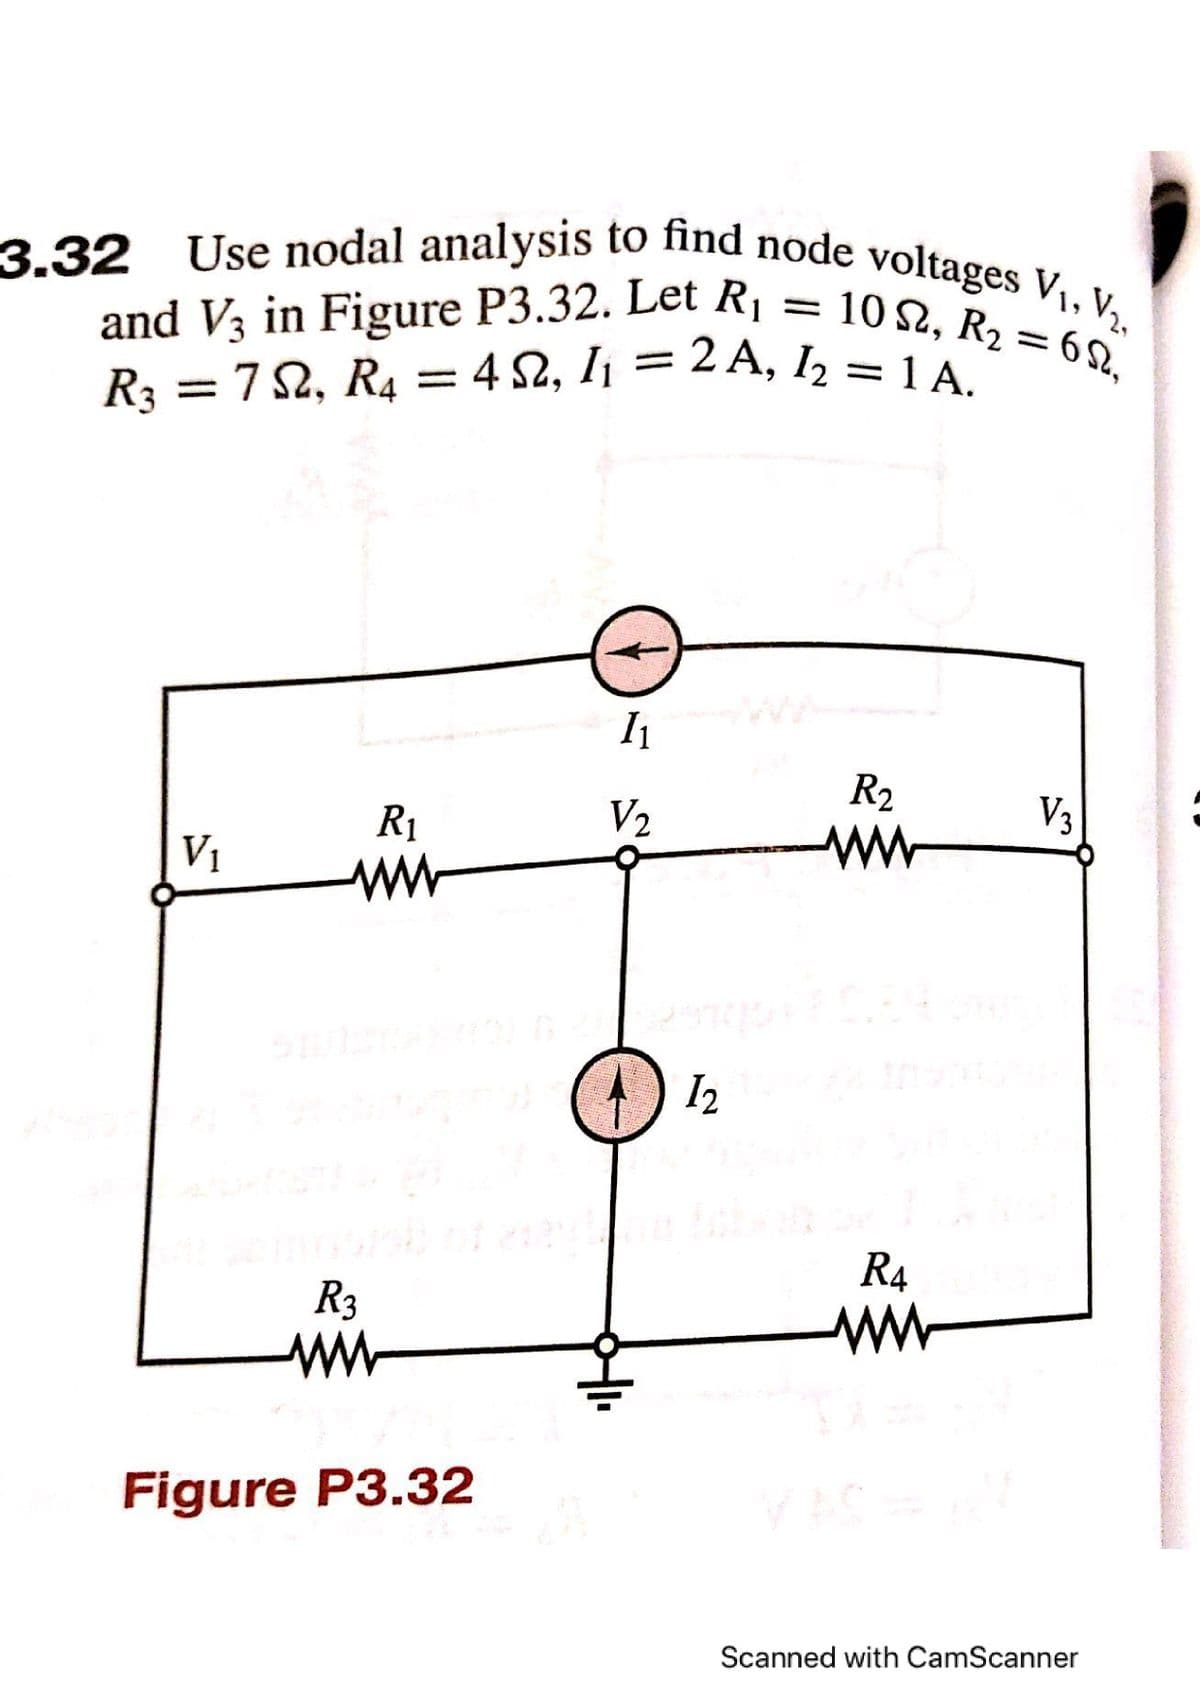 :7 2, R4 = 4 S2, I¡ = 2 A, I2 = 1 A.
3.32 Use nodal analysis to find node voltages V,, V½,
and V3 in Figure P3.32. Let Rị = 10 2, R2 = 6 Q,
3.32
and V3 in Figure P3.32. Let R,
R3 =72, R4
10 2, R2 = 62.
||
I1
R2
R1
V2
Va
V1
ww
ww
I2
R4
R3
ww
ww
Figure P3.32
Scanned with CamScanner
